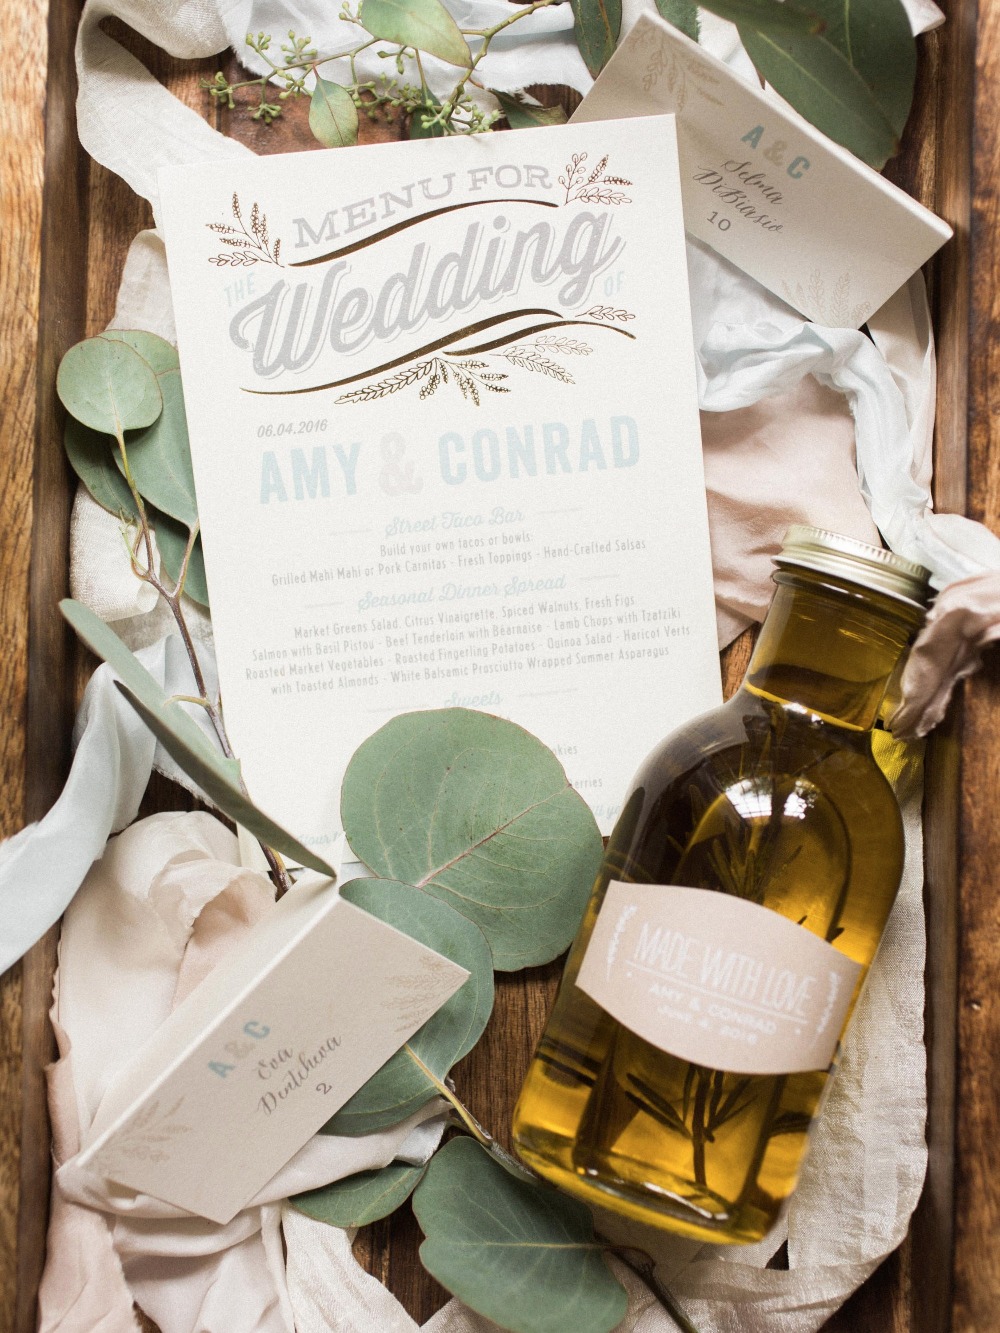 Wedding invite and olive oil wedding favor